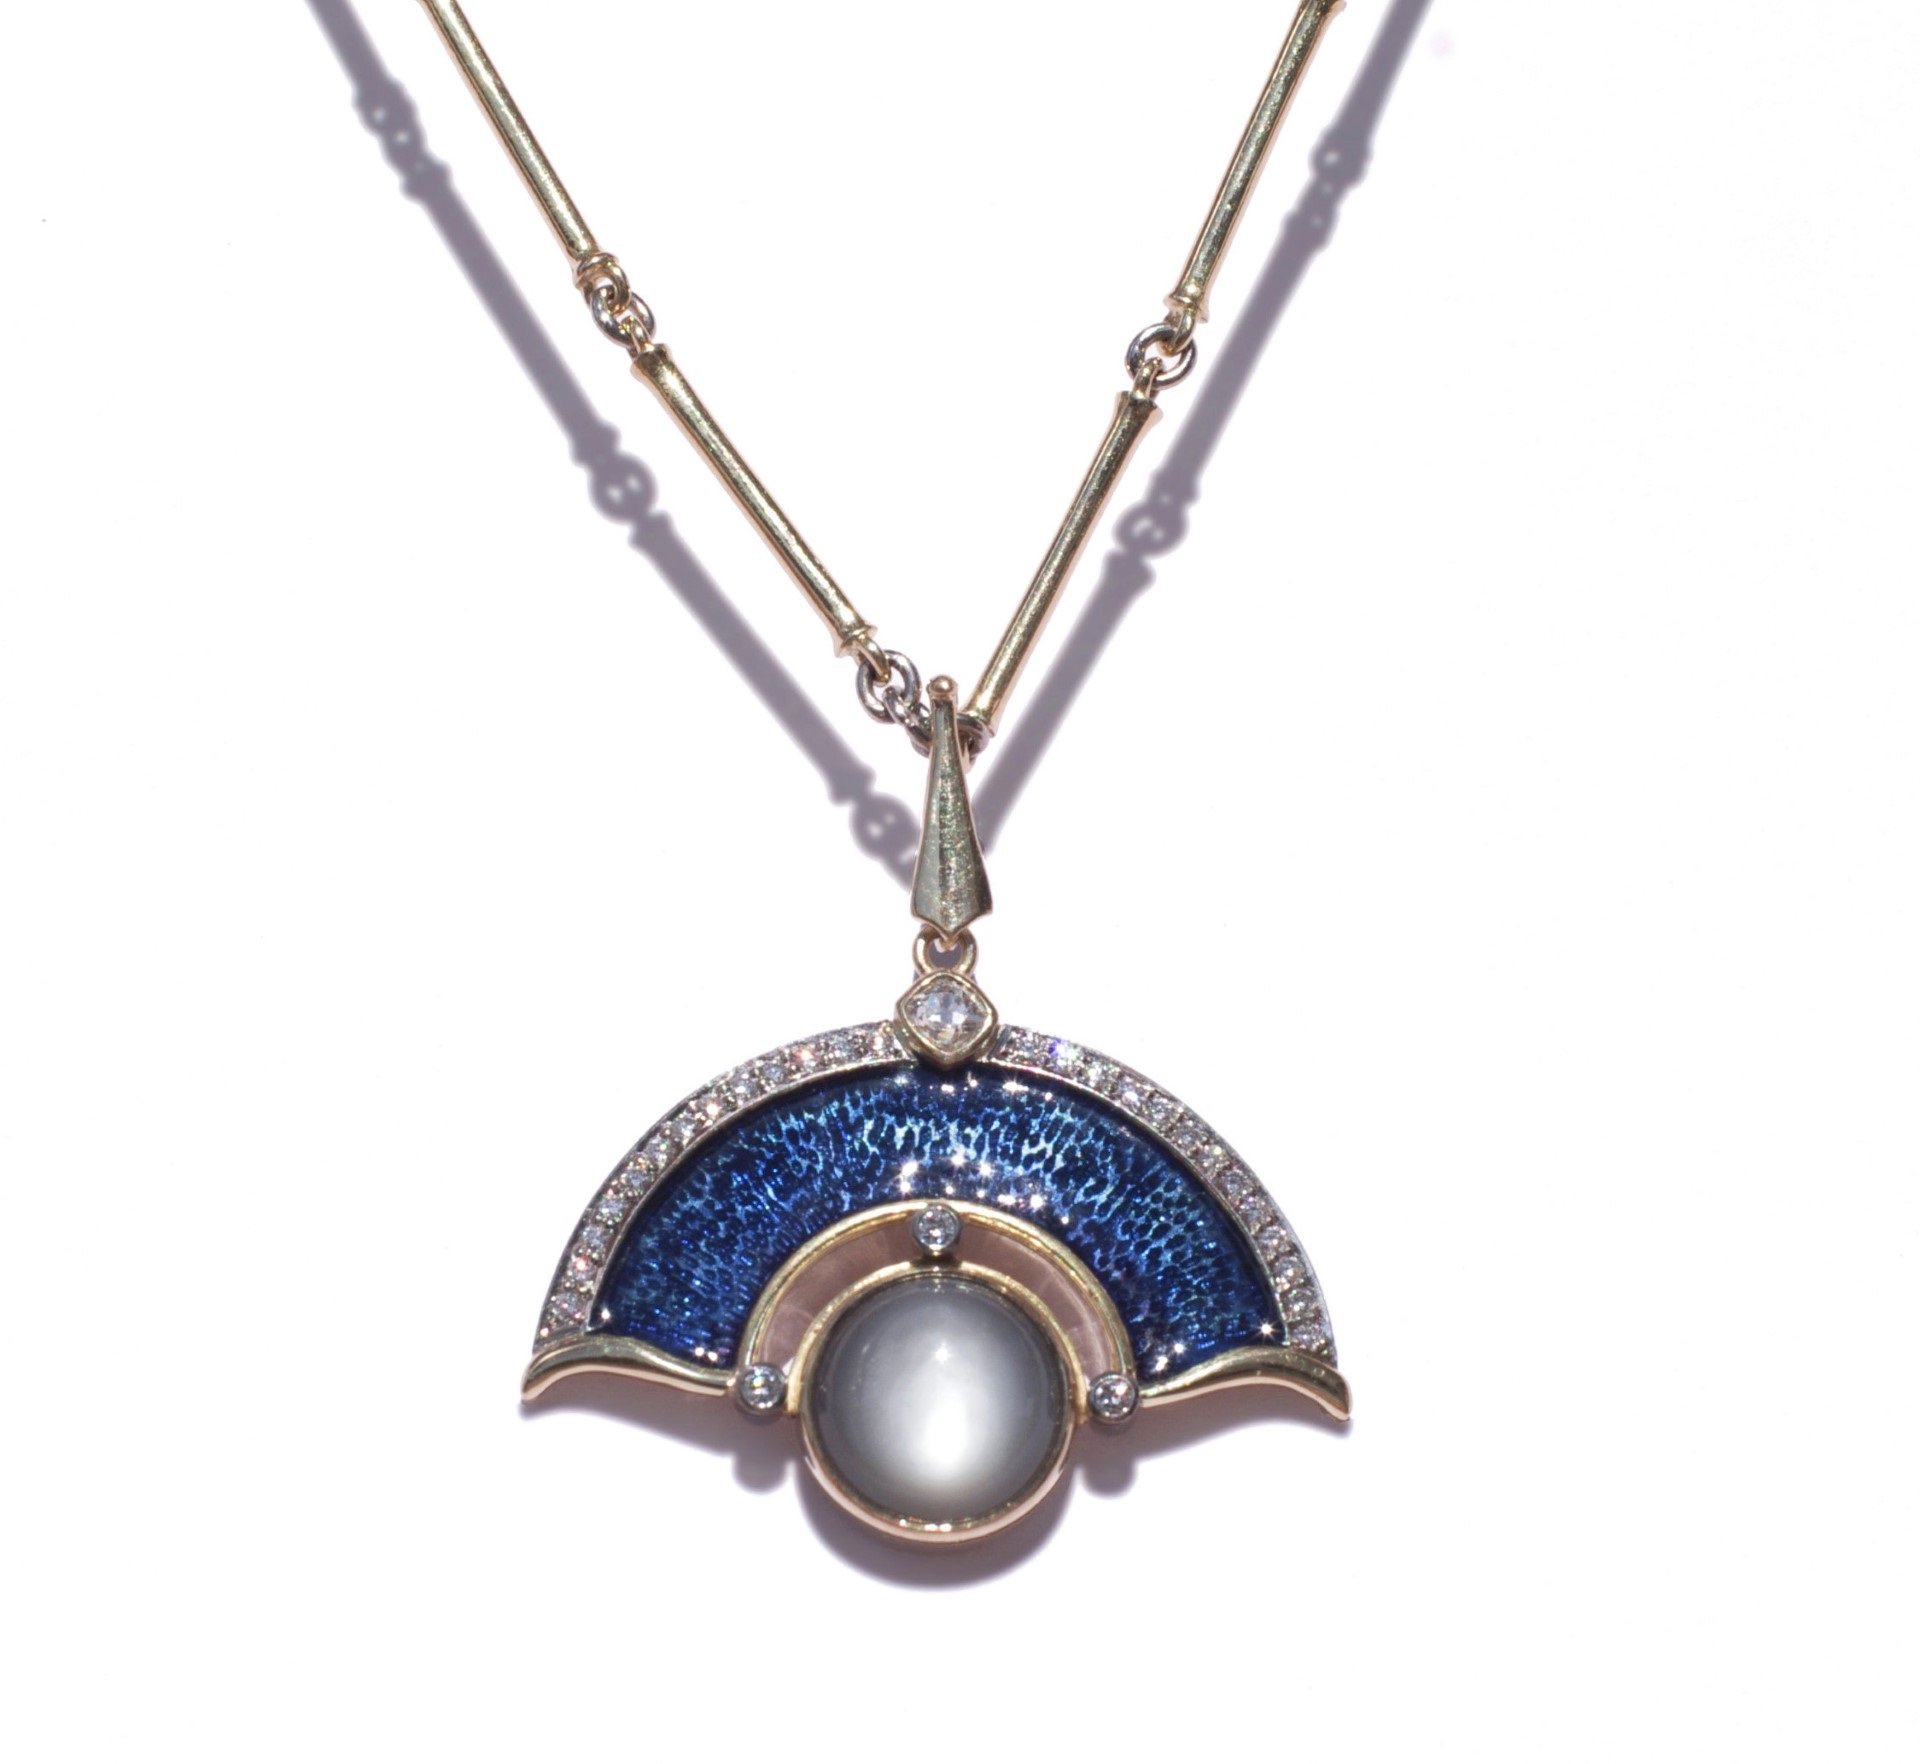 The "Midnight" Moonstone pendant is a featured work in an exhibition of jewellery by Dunedin...